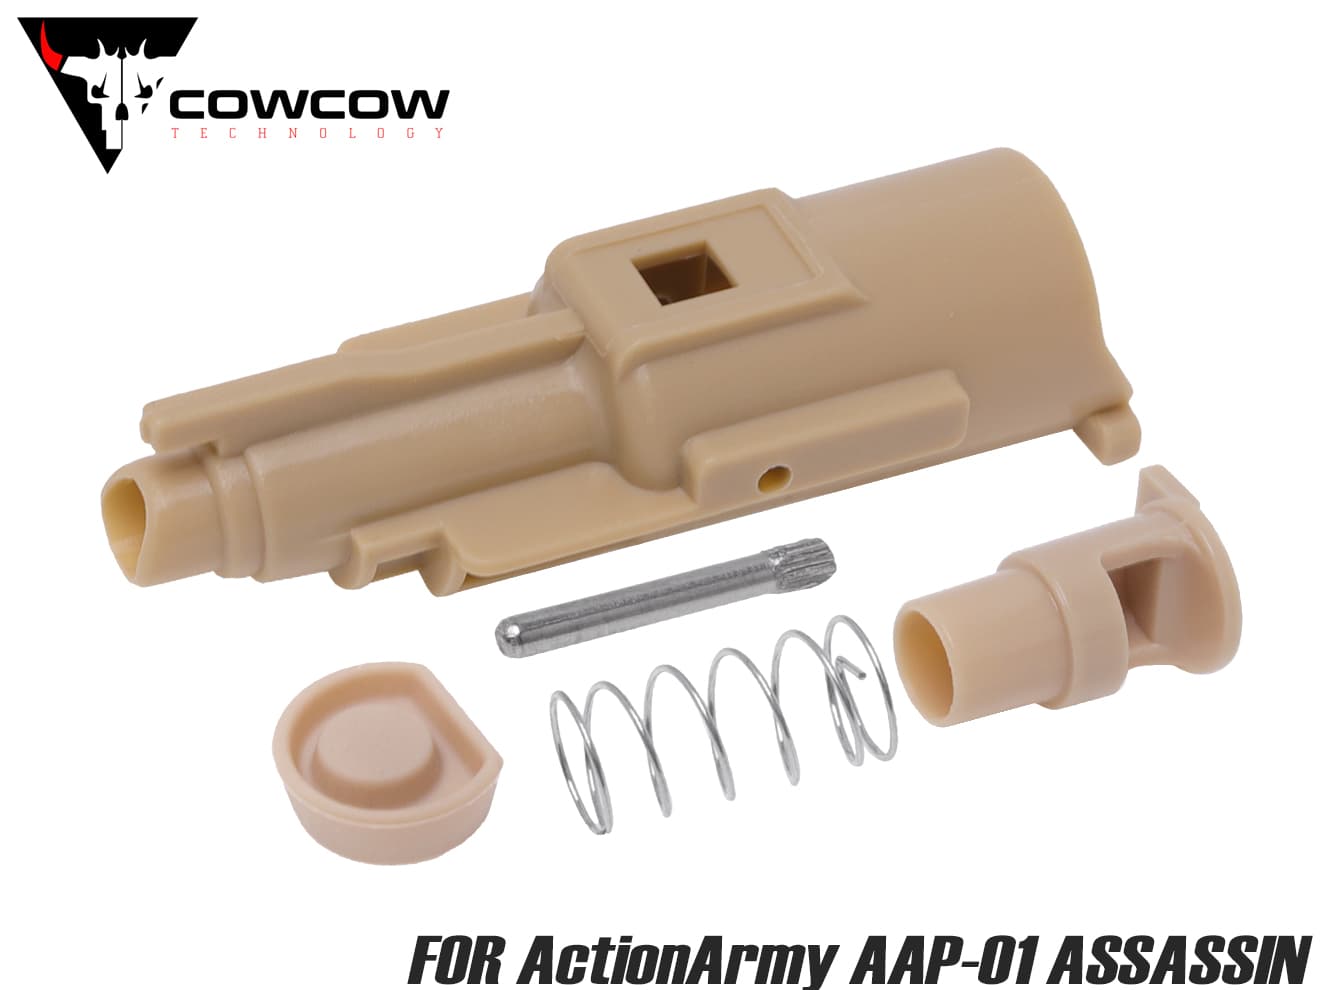 COWCOW TECHNOLOGY 強化ローディングノズルフルセット for ActionArmy